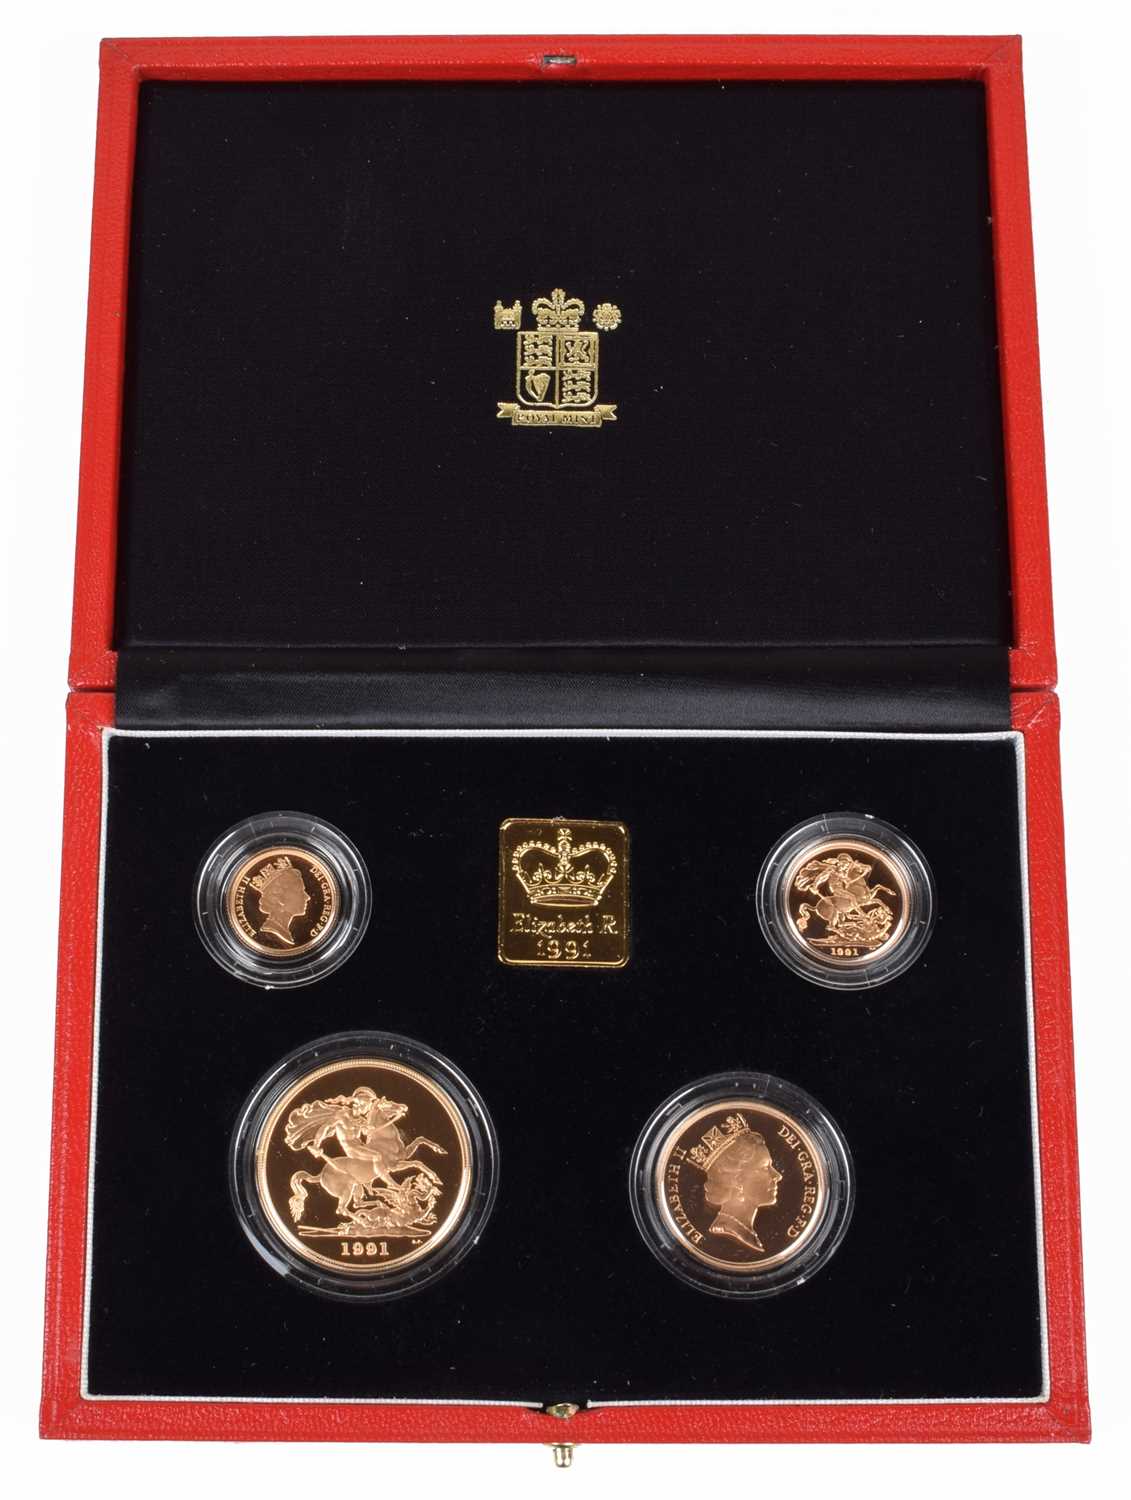 Lot Elizabeth II, United Kingdom, 1991, Gold Proof Four Coin Collection, Royal Mint.